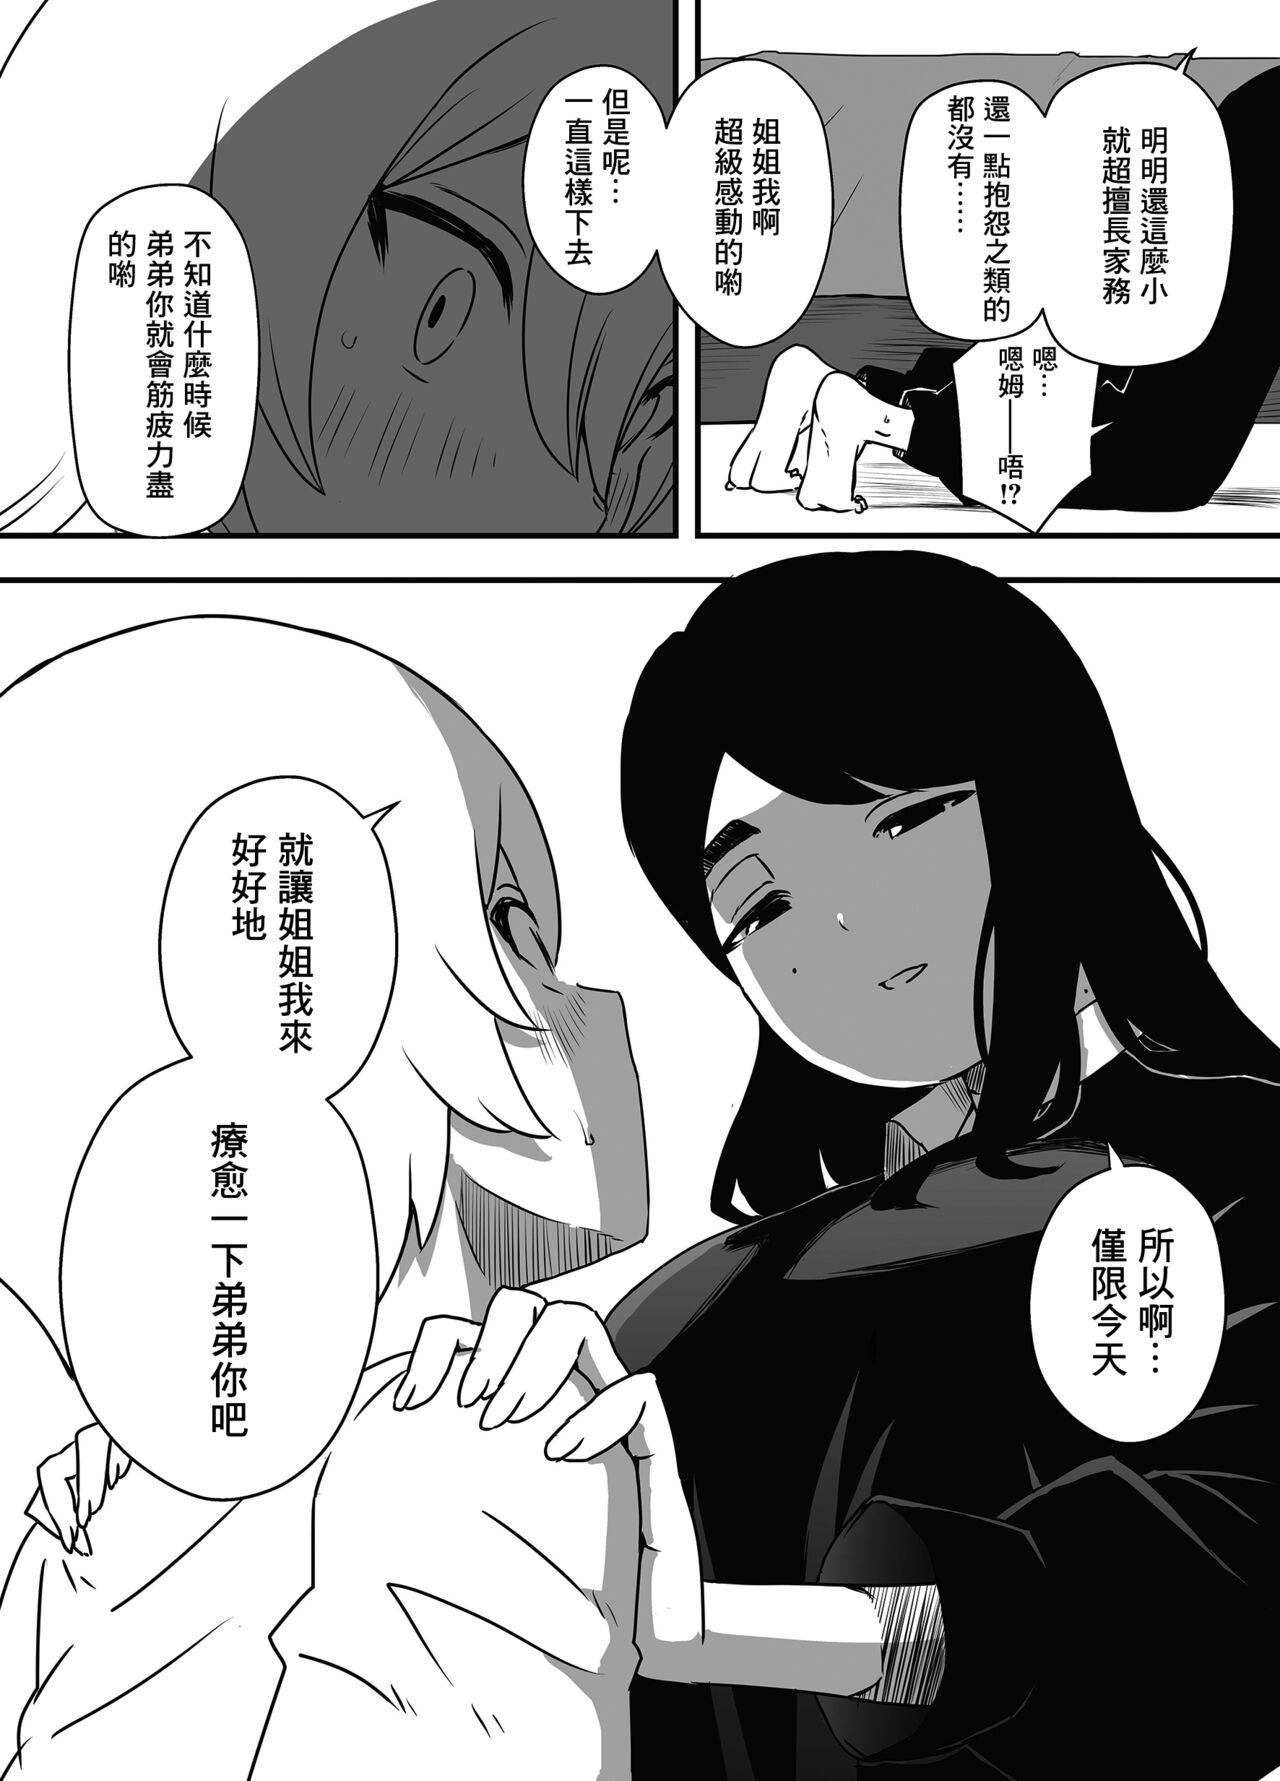 Babe 兄ちゃんの彼女 Fitness - Page 9